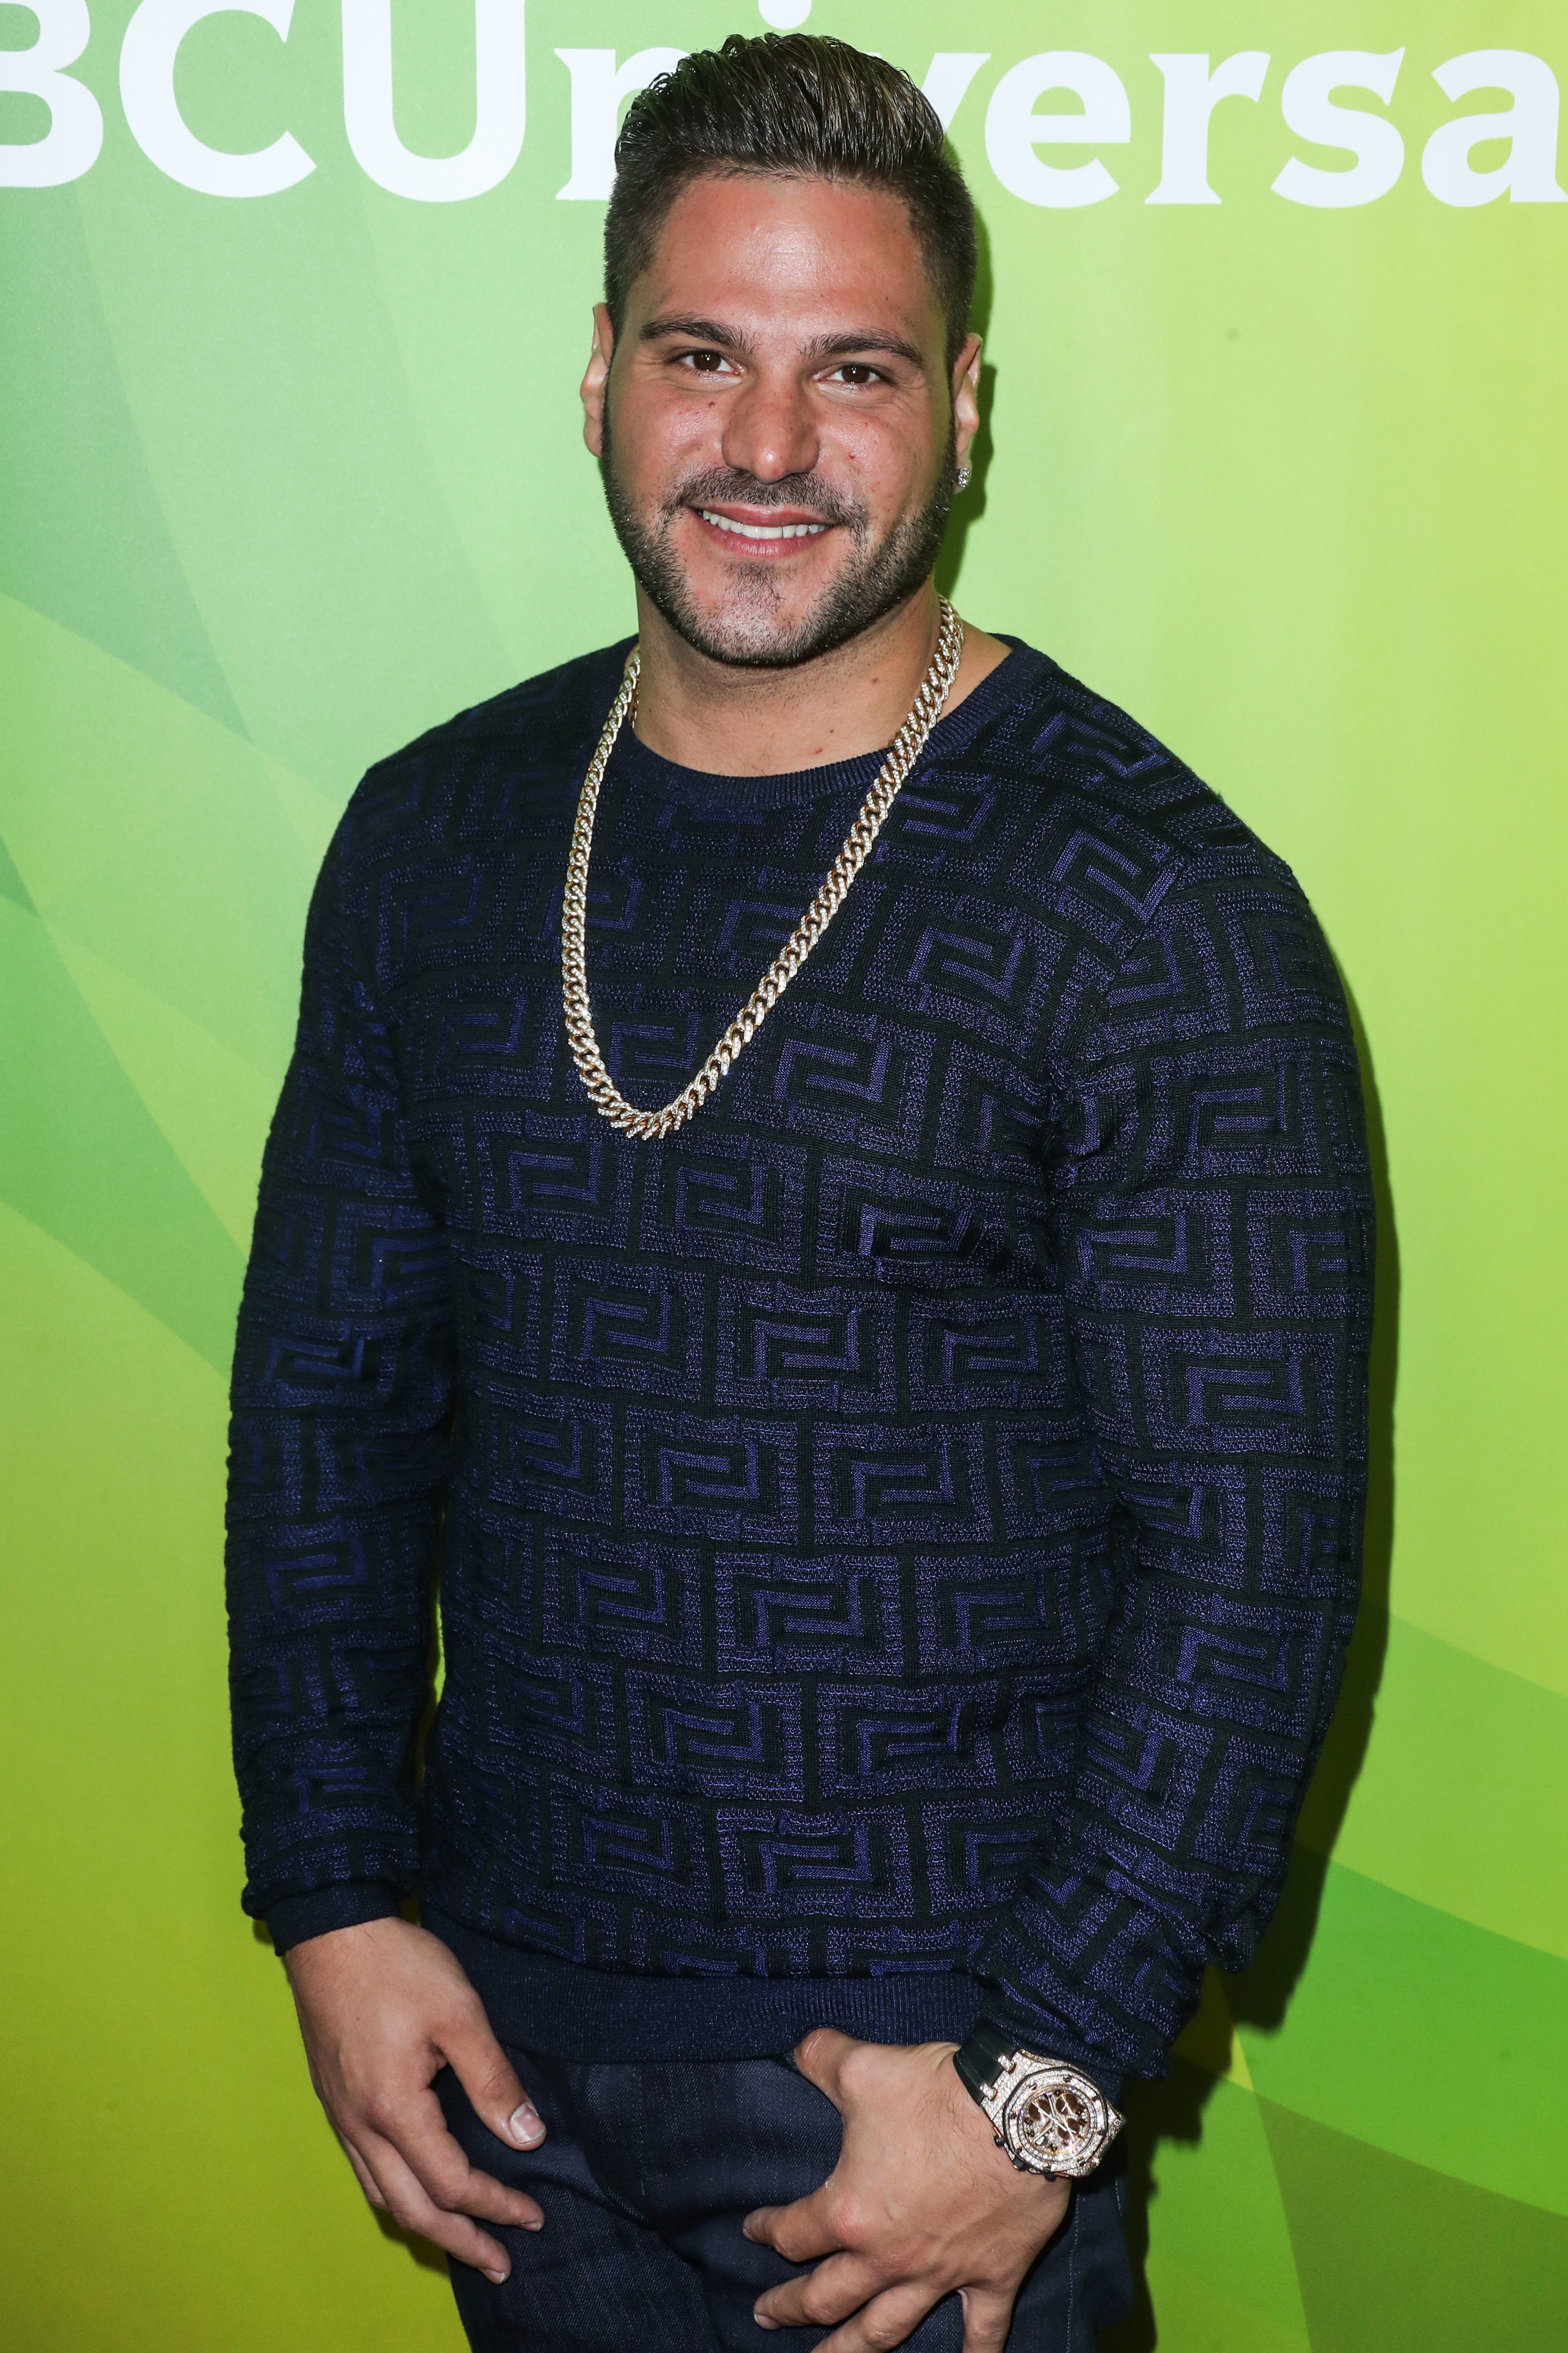 Pauly D: Ronnie Ortiz-Magro Puts 'Daughter First' Amid Drama